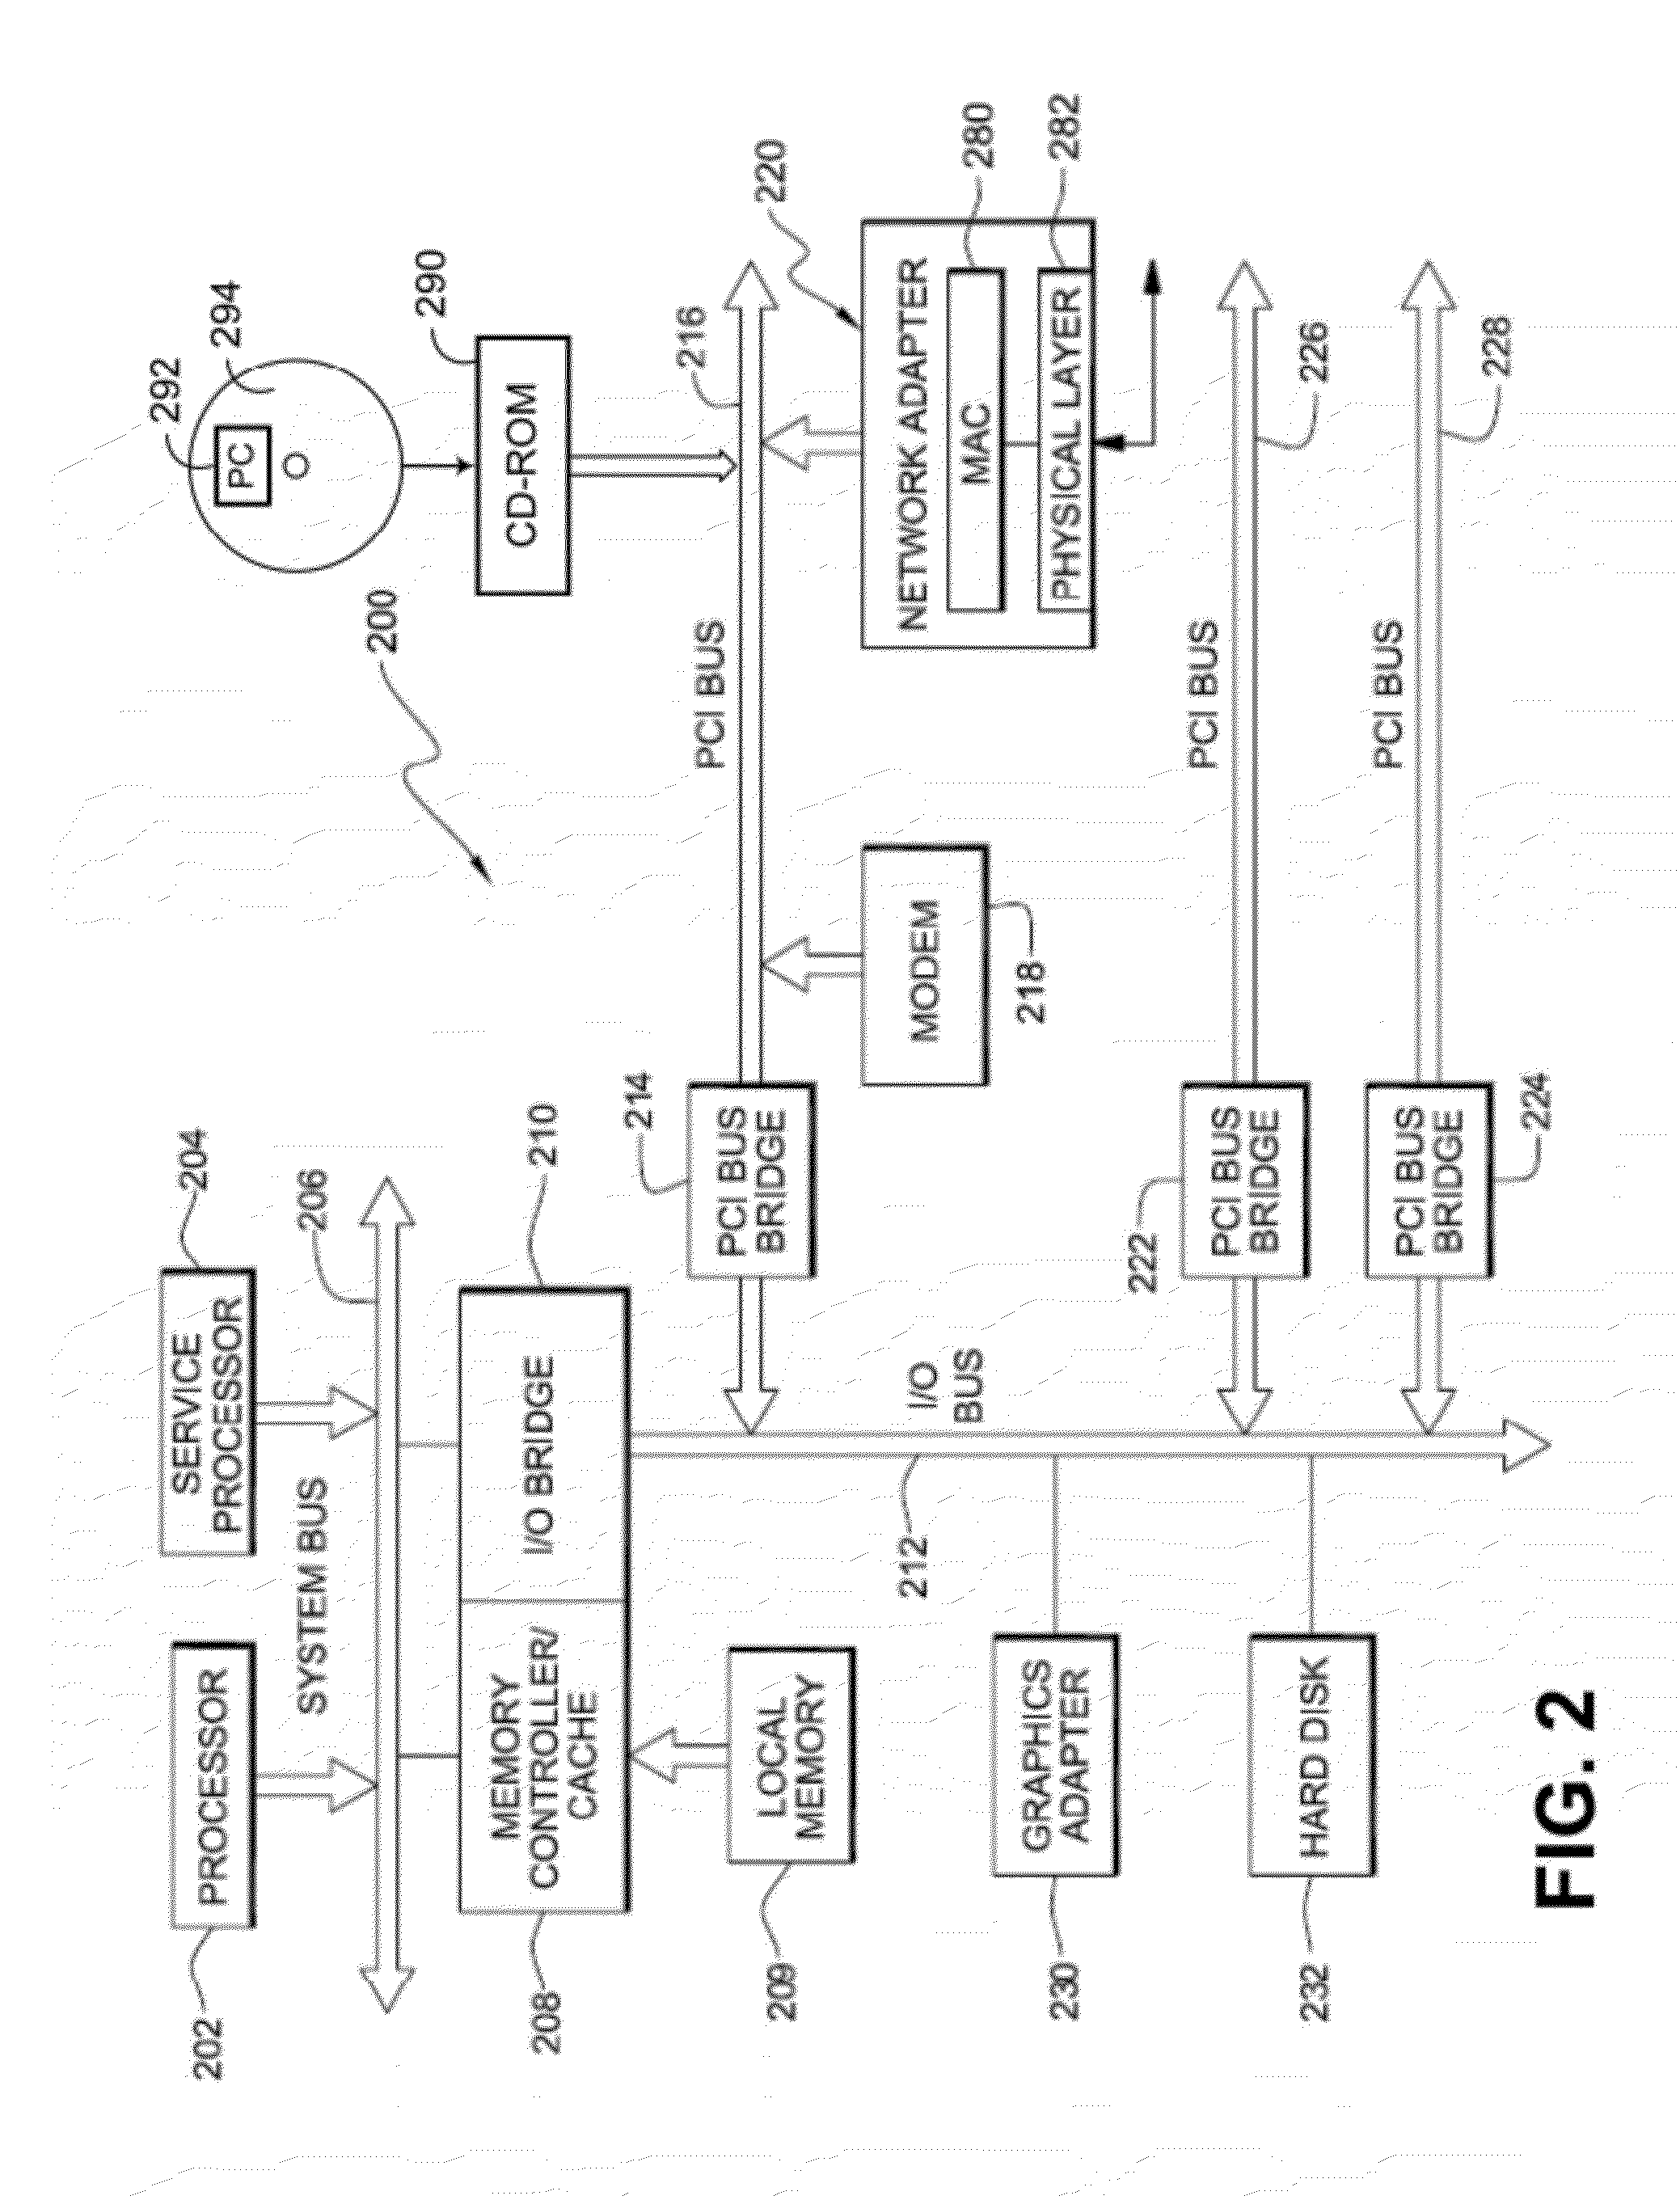 Virtualization of vendor specific network interfaces of self-virtualizing input/output device virtual functions